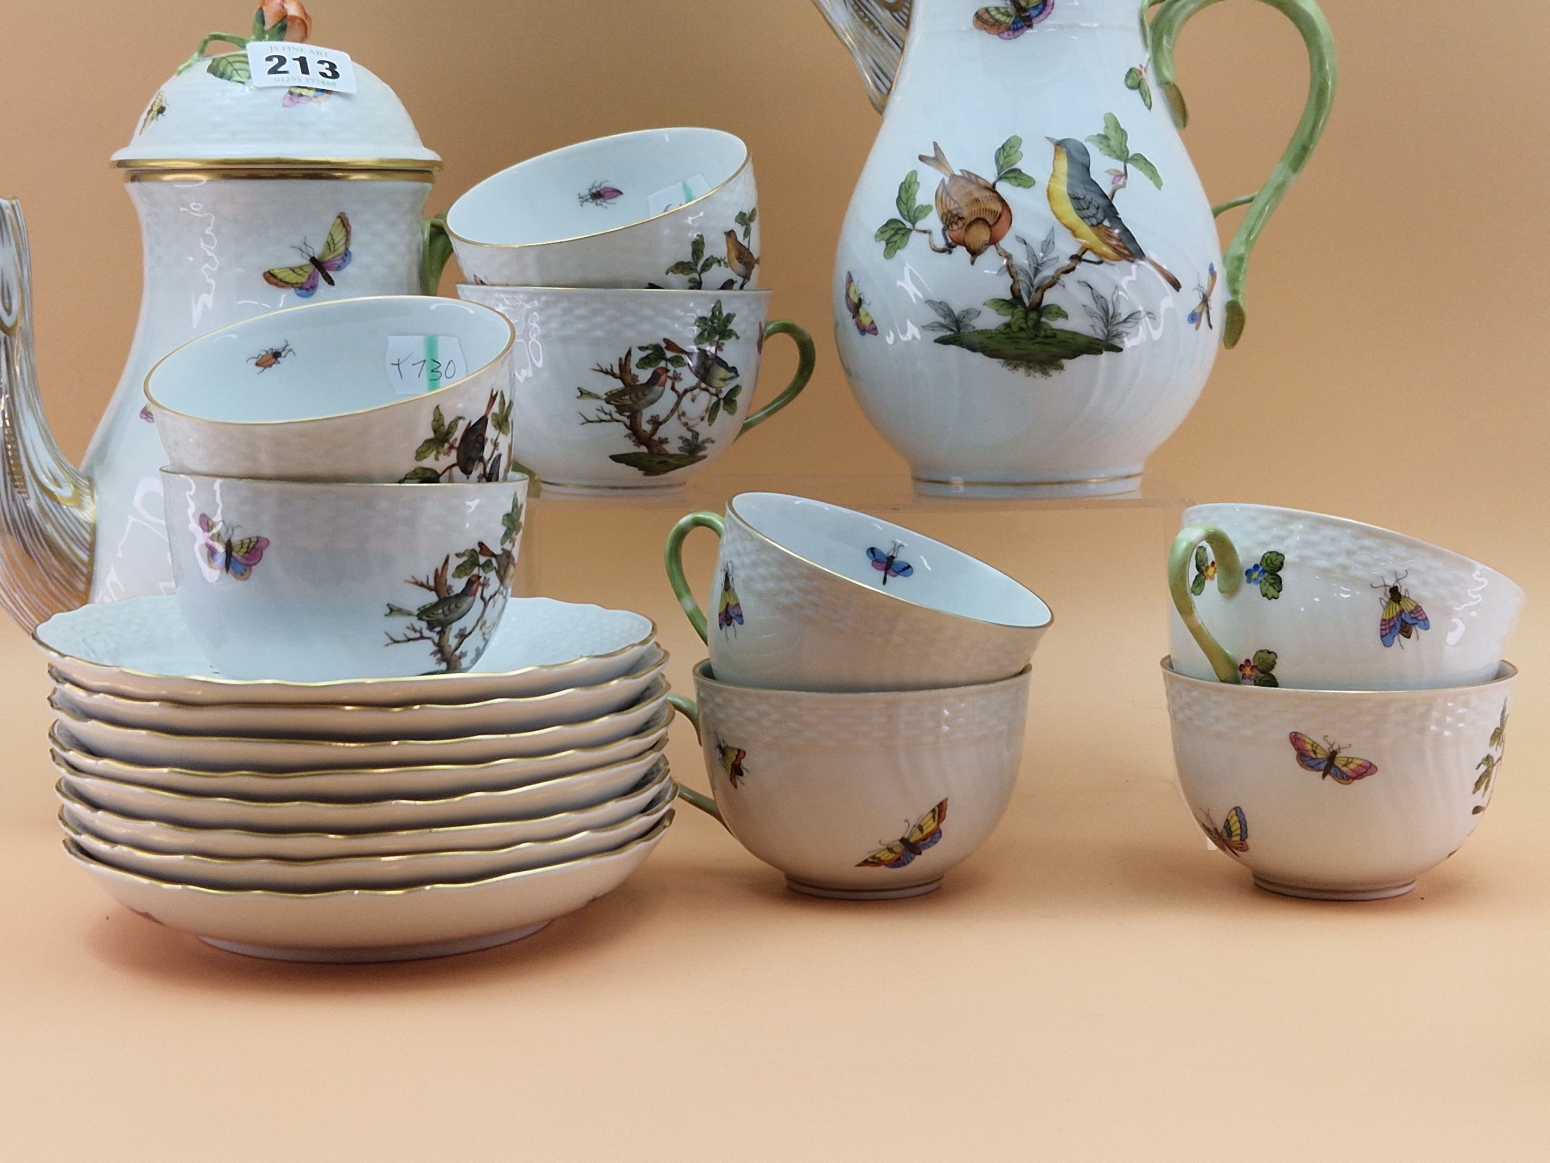 A HEREND PART TEA AND COFFEE SET, COMPRISING: EIGHT CUPS AND SAUCERS, A MILK JUG, A COVERED TEA - Image 4 of 8